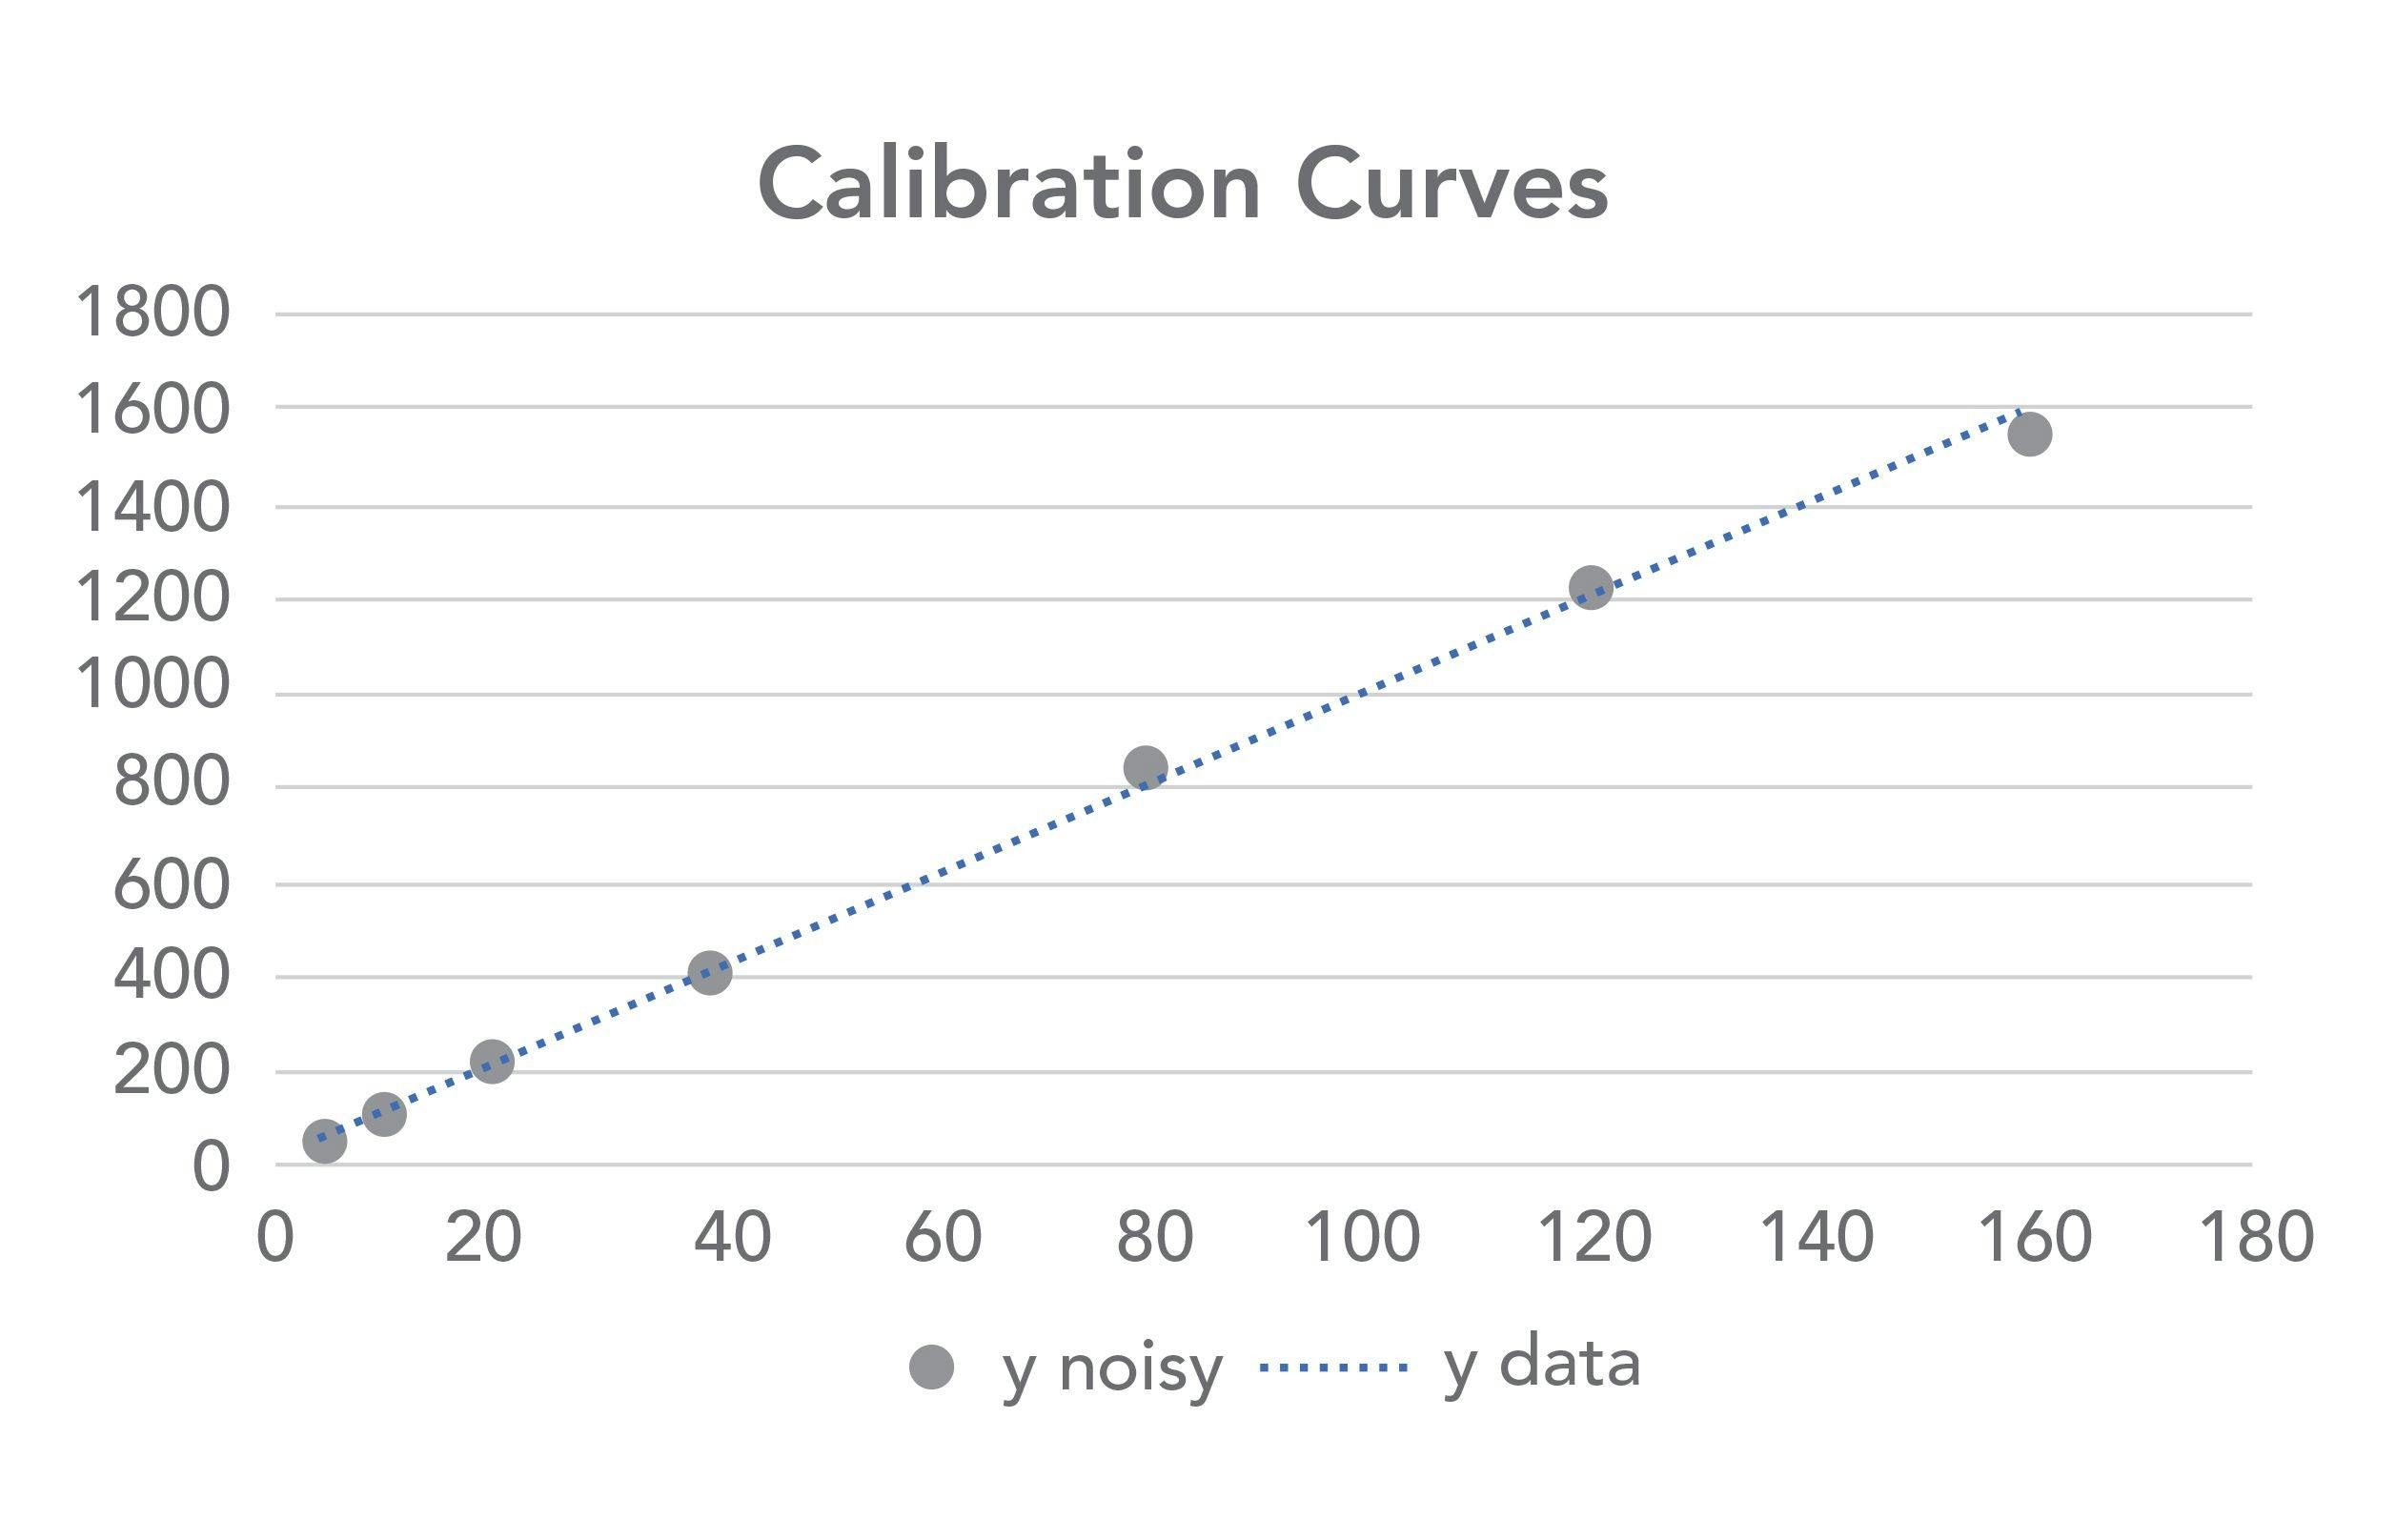 FIGURE 2: Calibration plot showing (blue dots) ideal data, and (gray dots) data with ±5% noise superimposed on the Y-values.